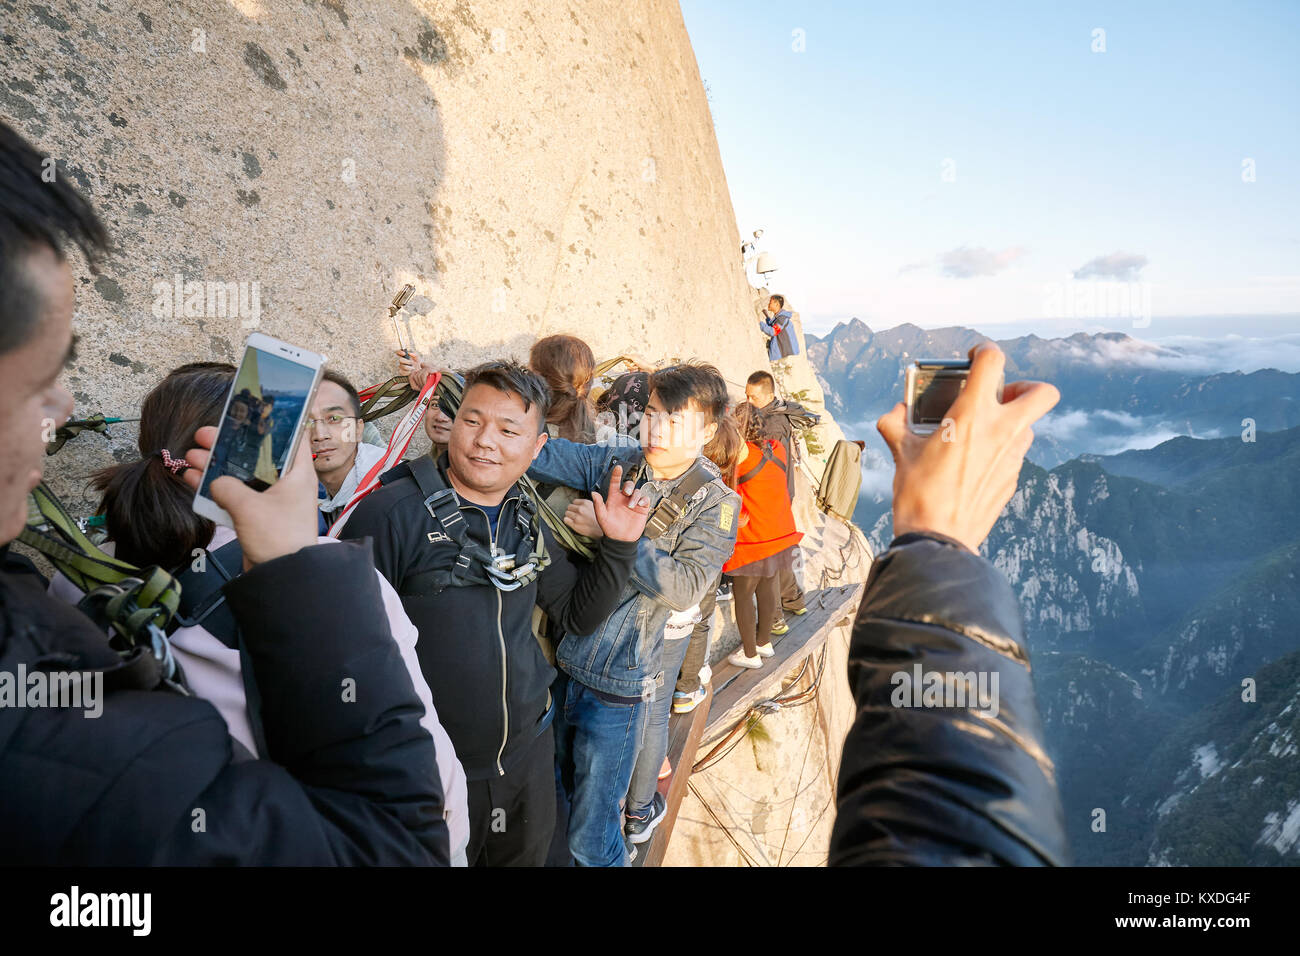 Mount Hua, Shaanxi Province, China - October 6, 2017: Tourists on the Plank Walk in the Sky, worlds most dangerous hike. Stock Photo